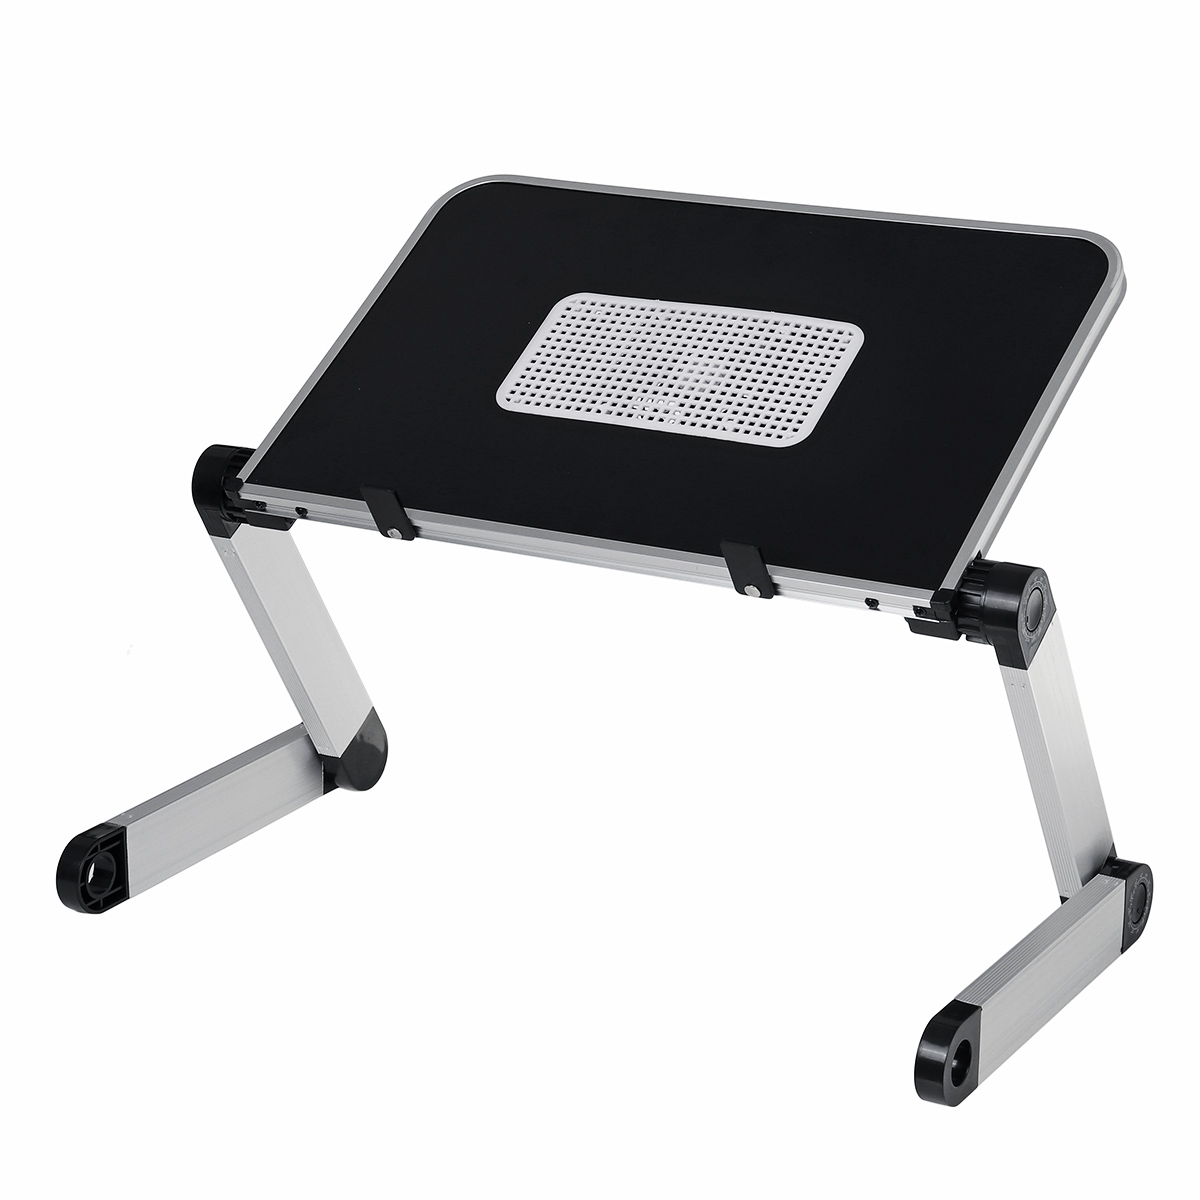 5026cm-Enlarge-Foldable-with-Cooling-Fan-Hole-Aluminum-Laptop-Computer-Desk-Table-TV-Bed-Computer-Ma-1700717-11